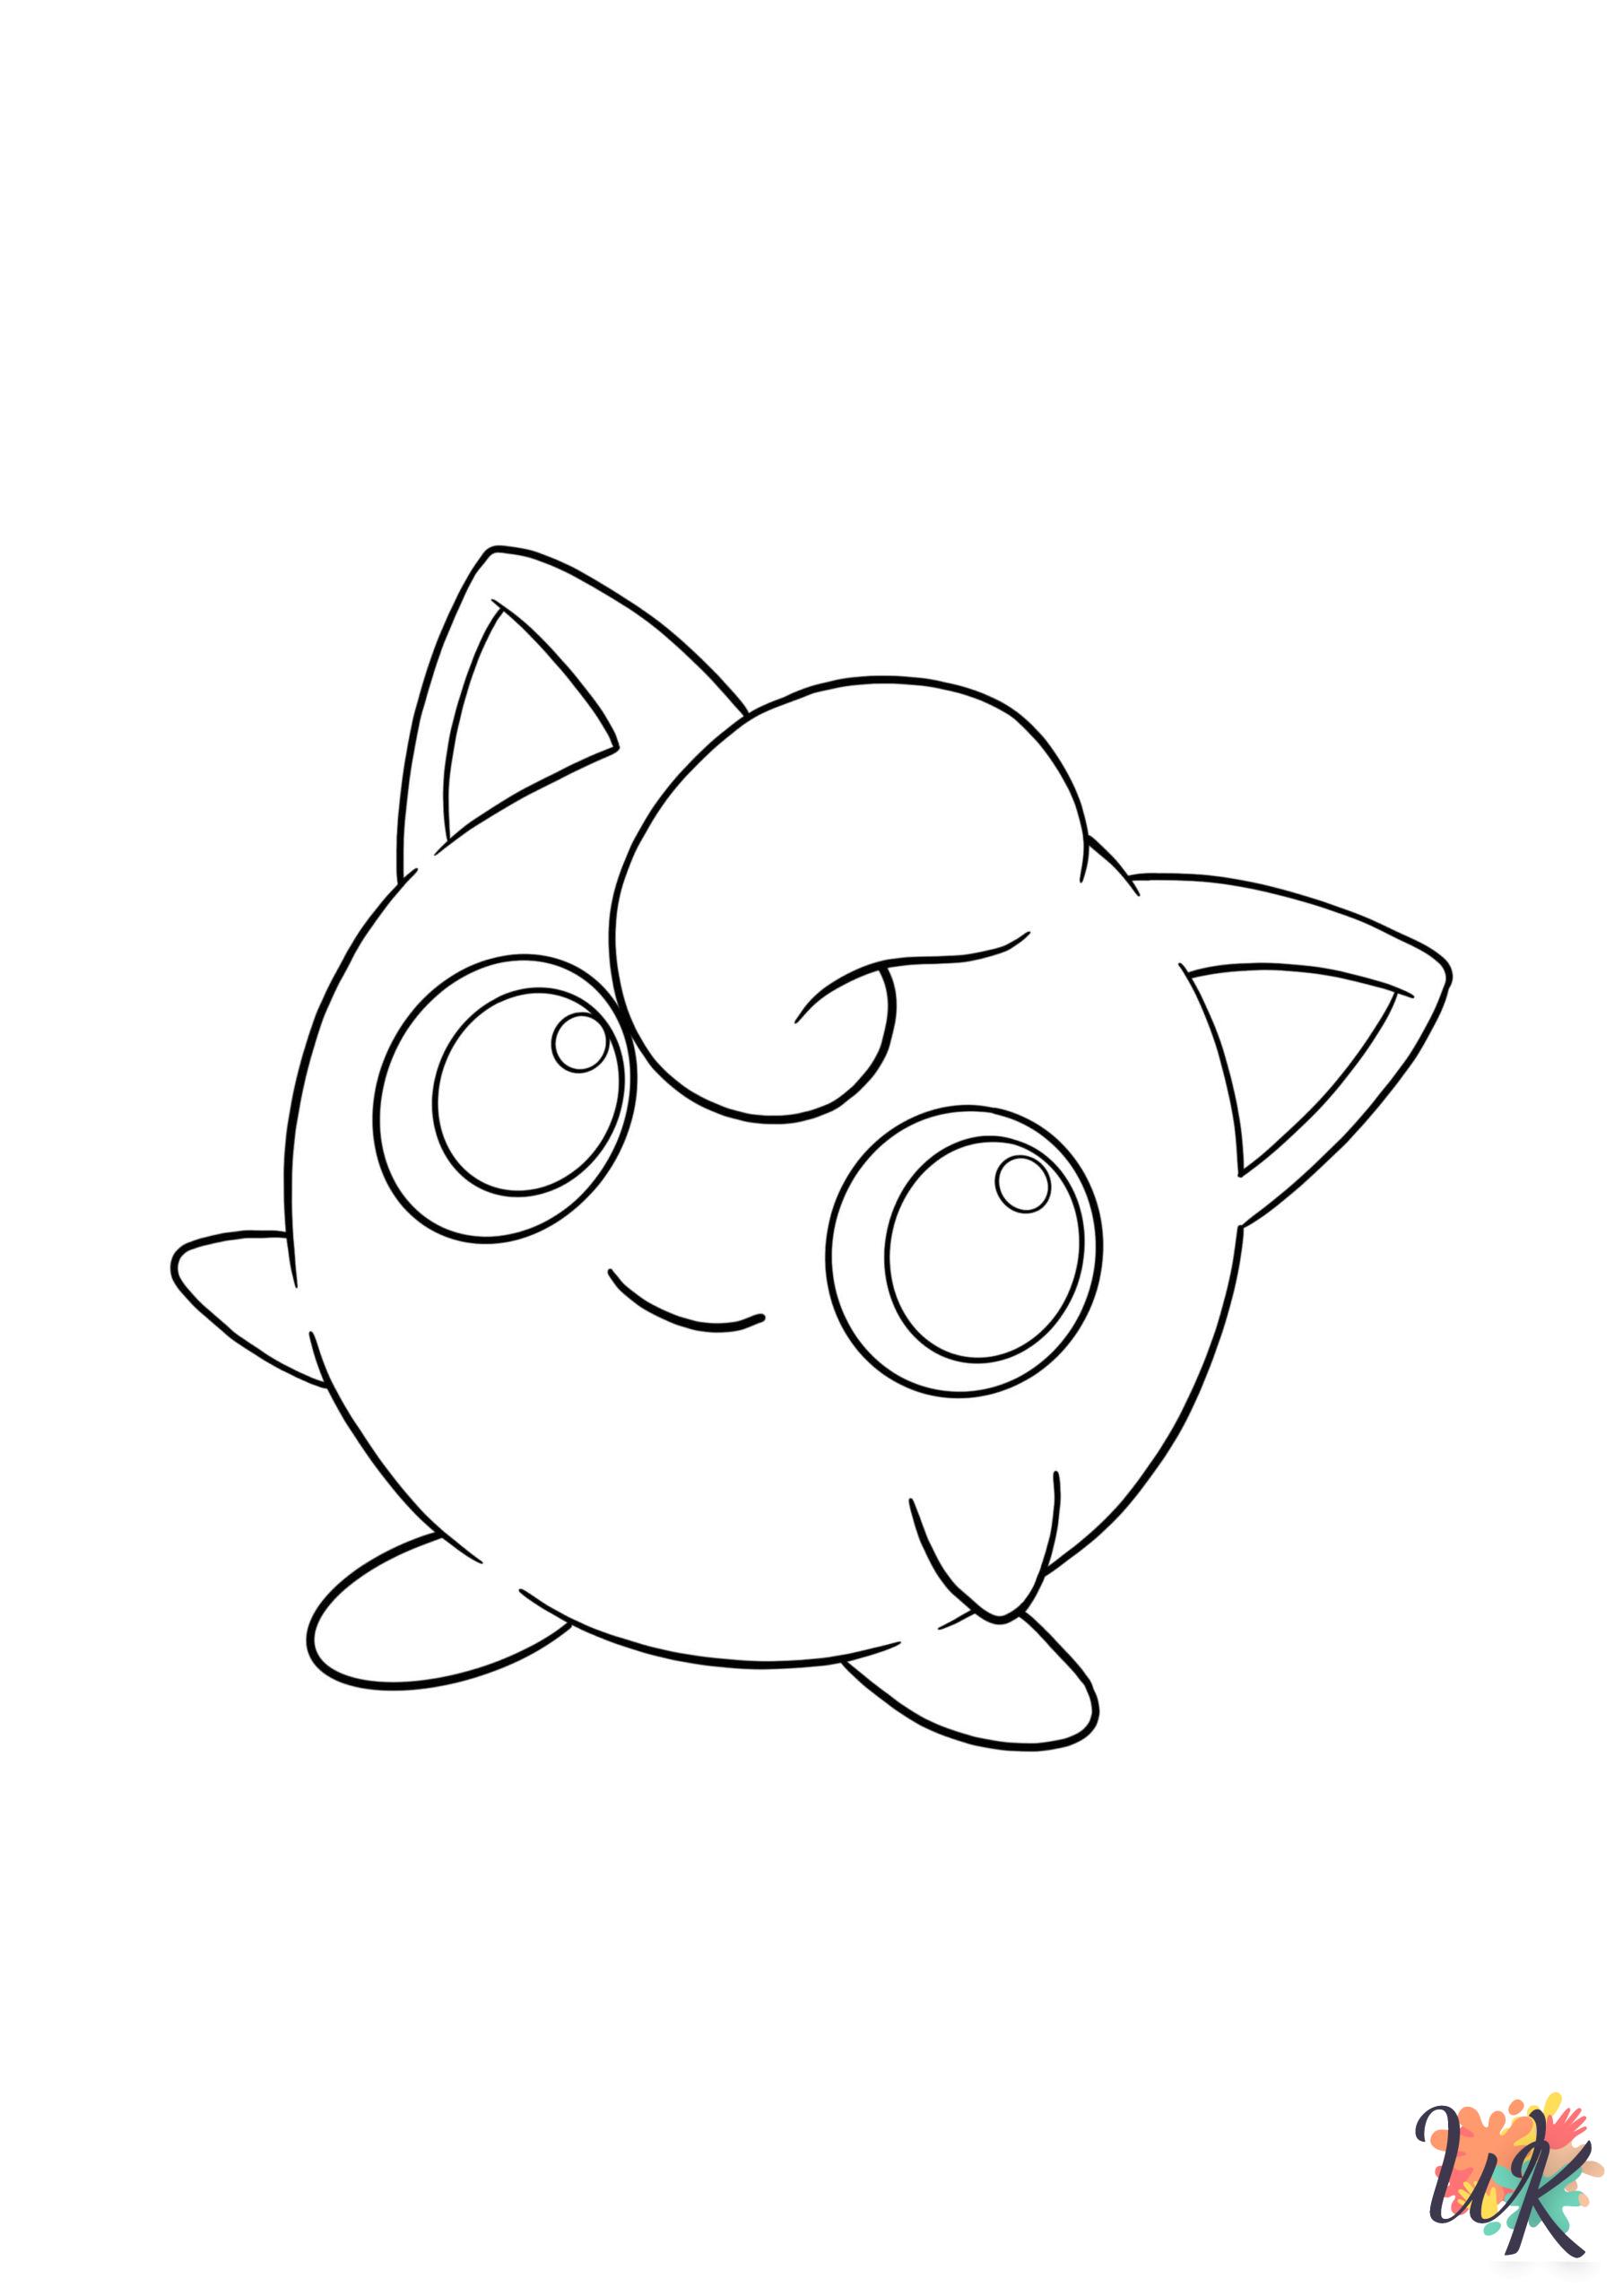 Jigglypuff coloring pages for adults pdf